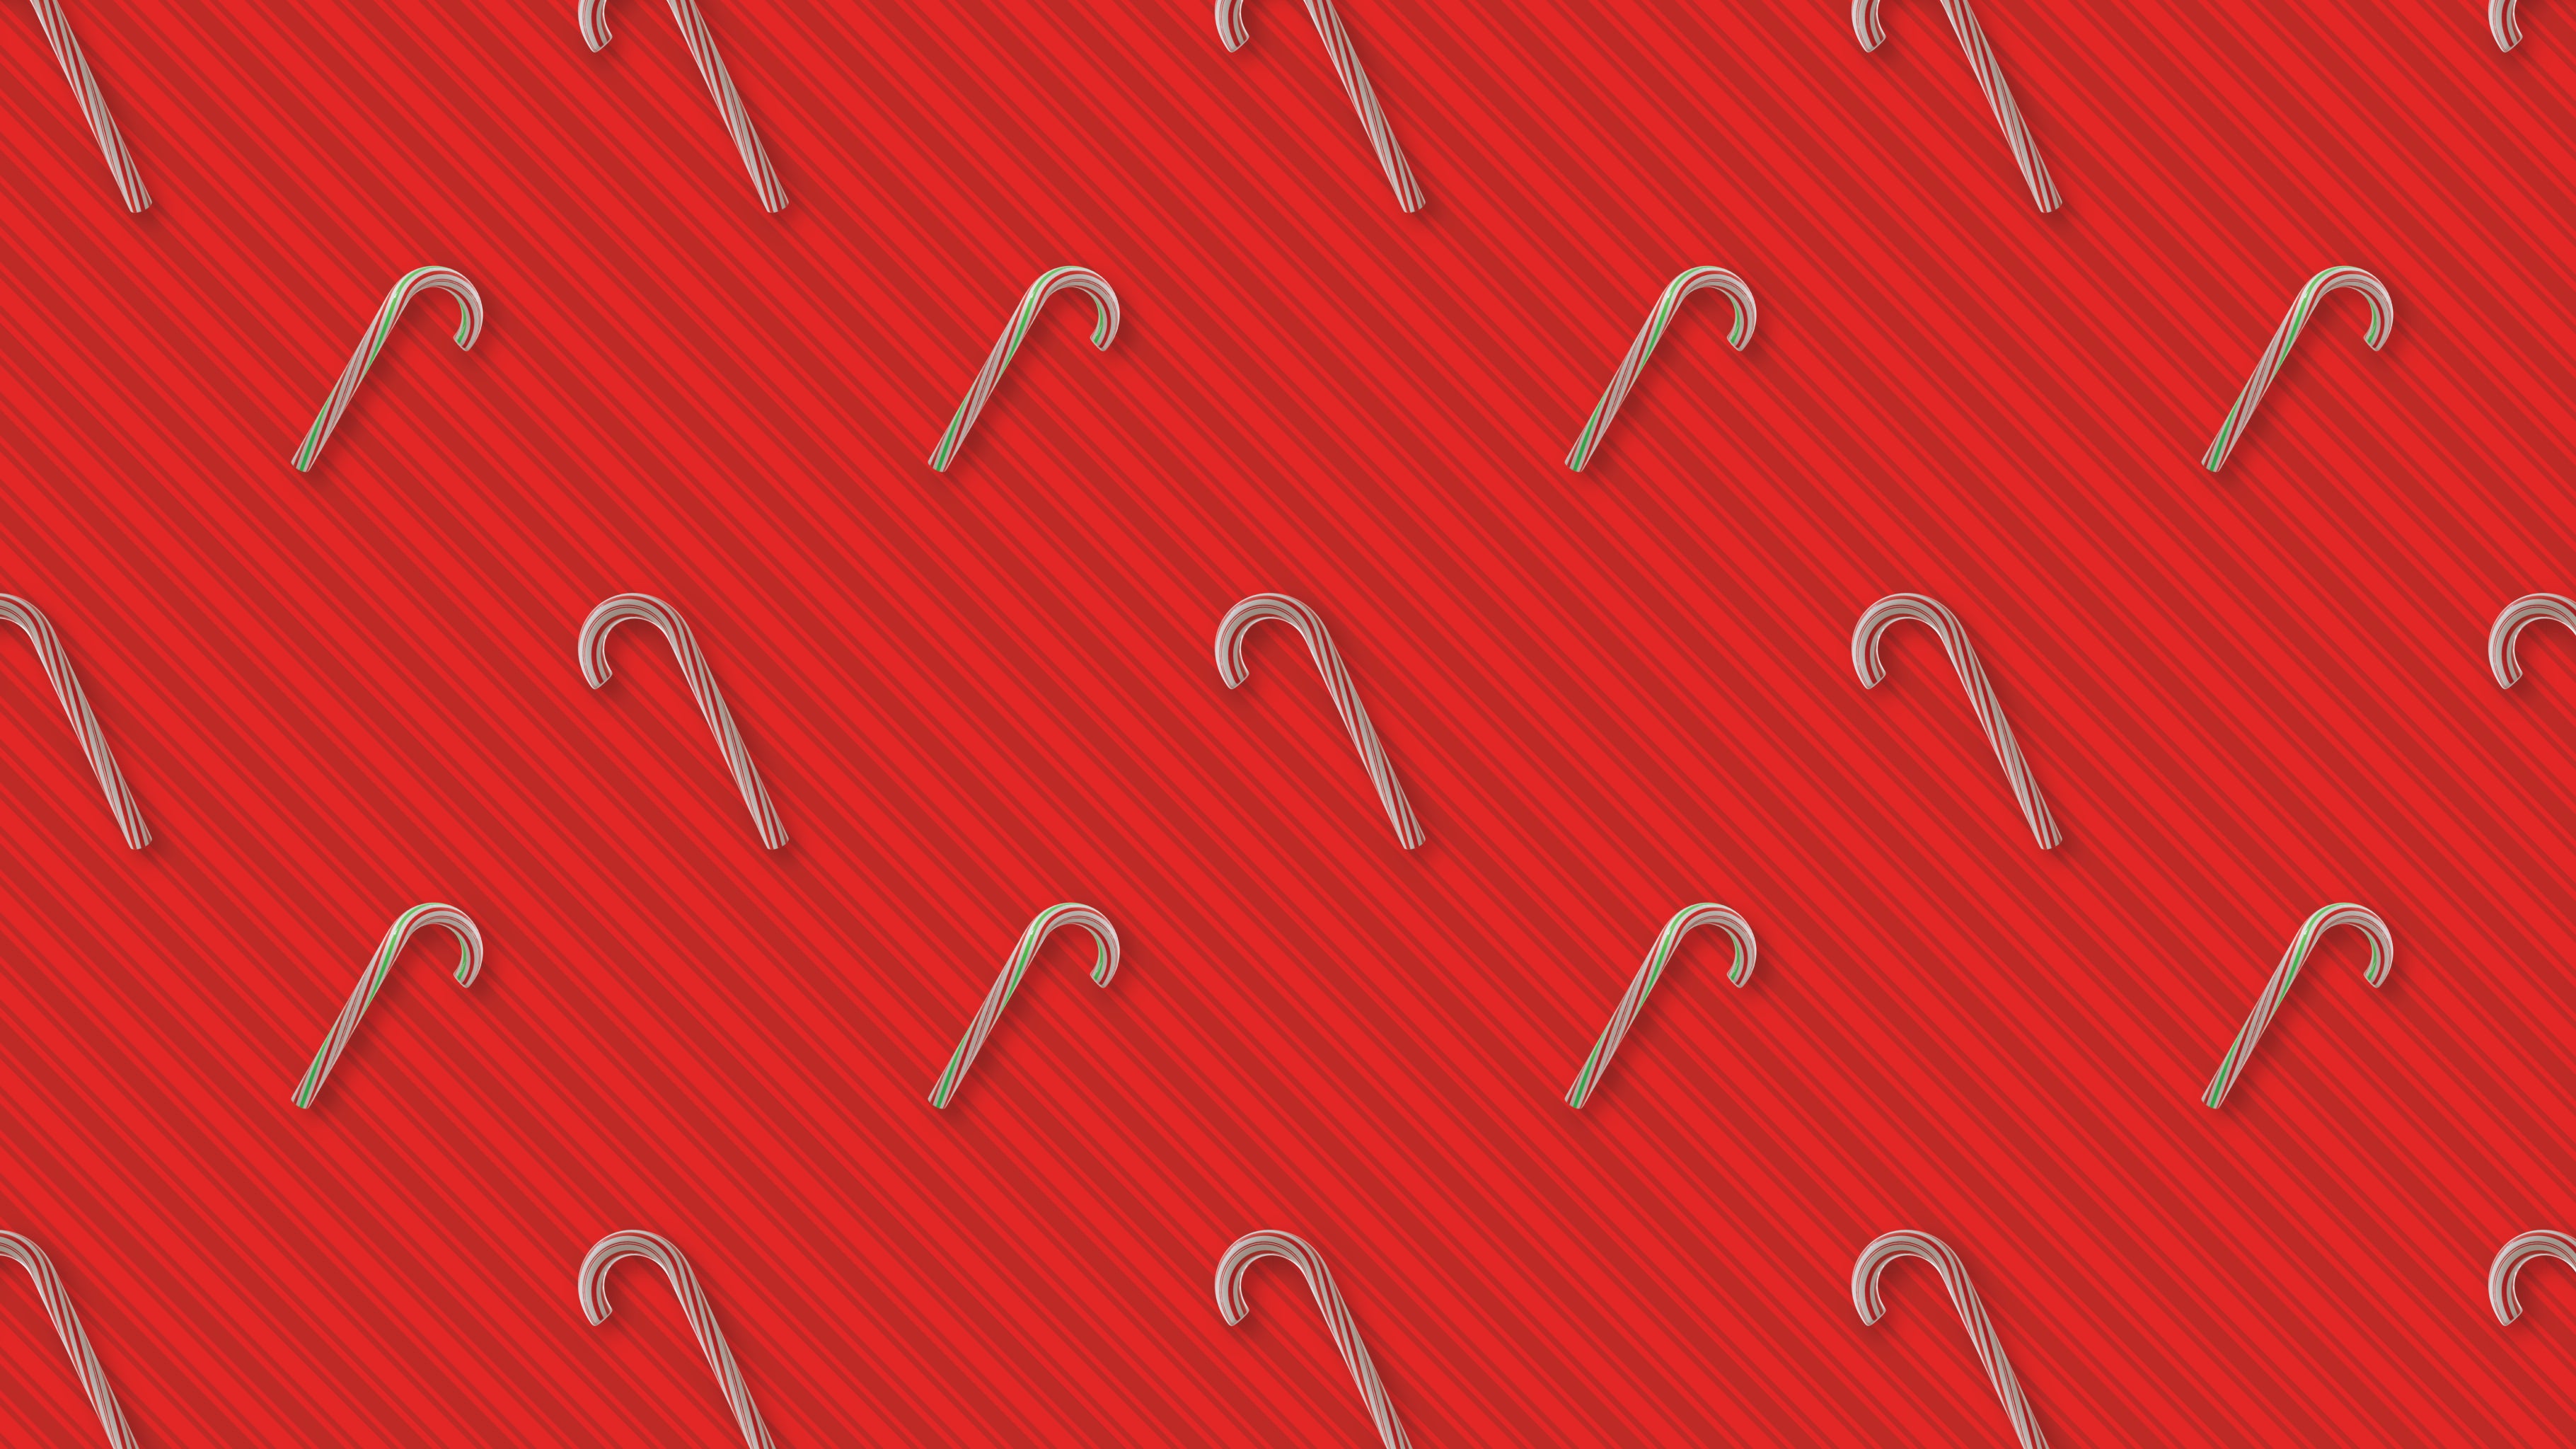 Candy Canes Red Stripe, by Studio Ten Design